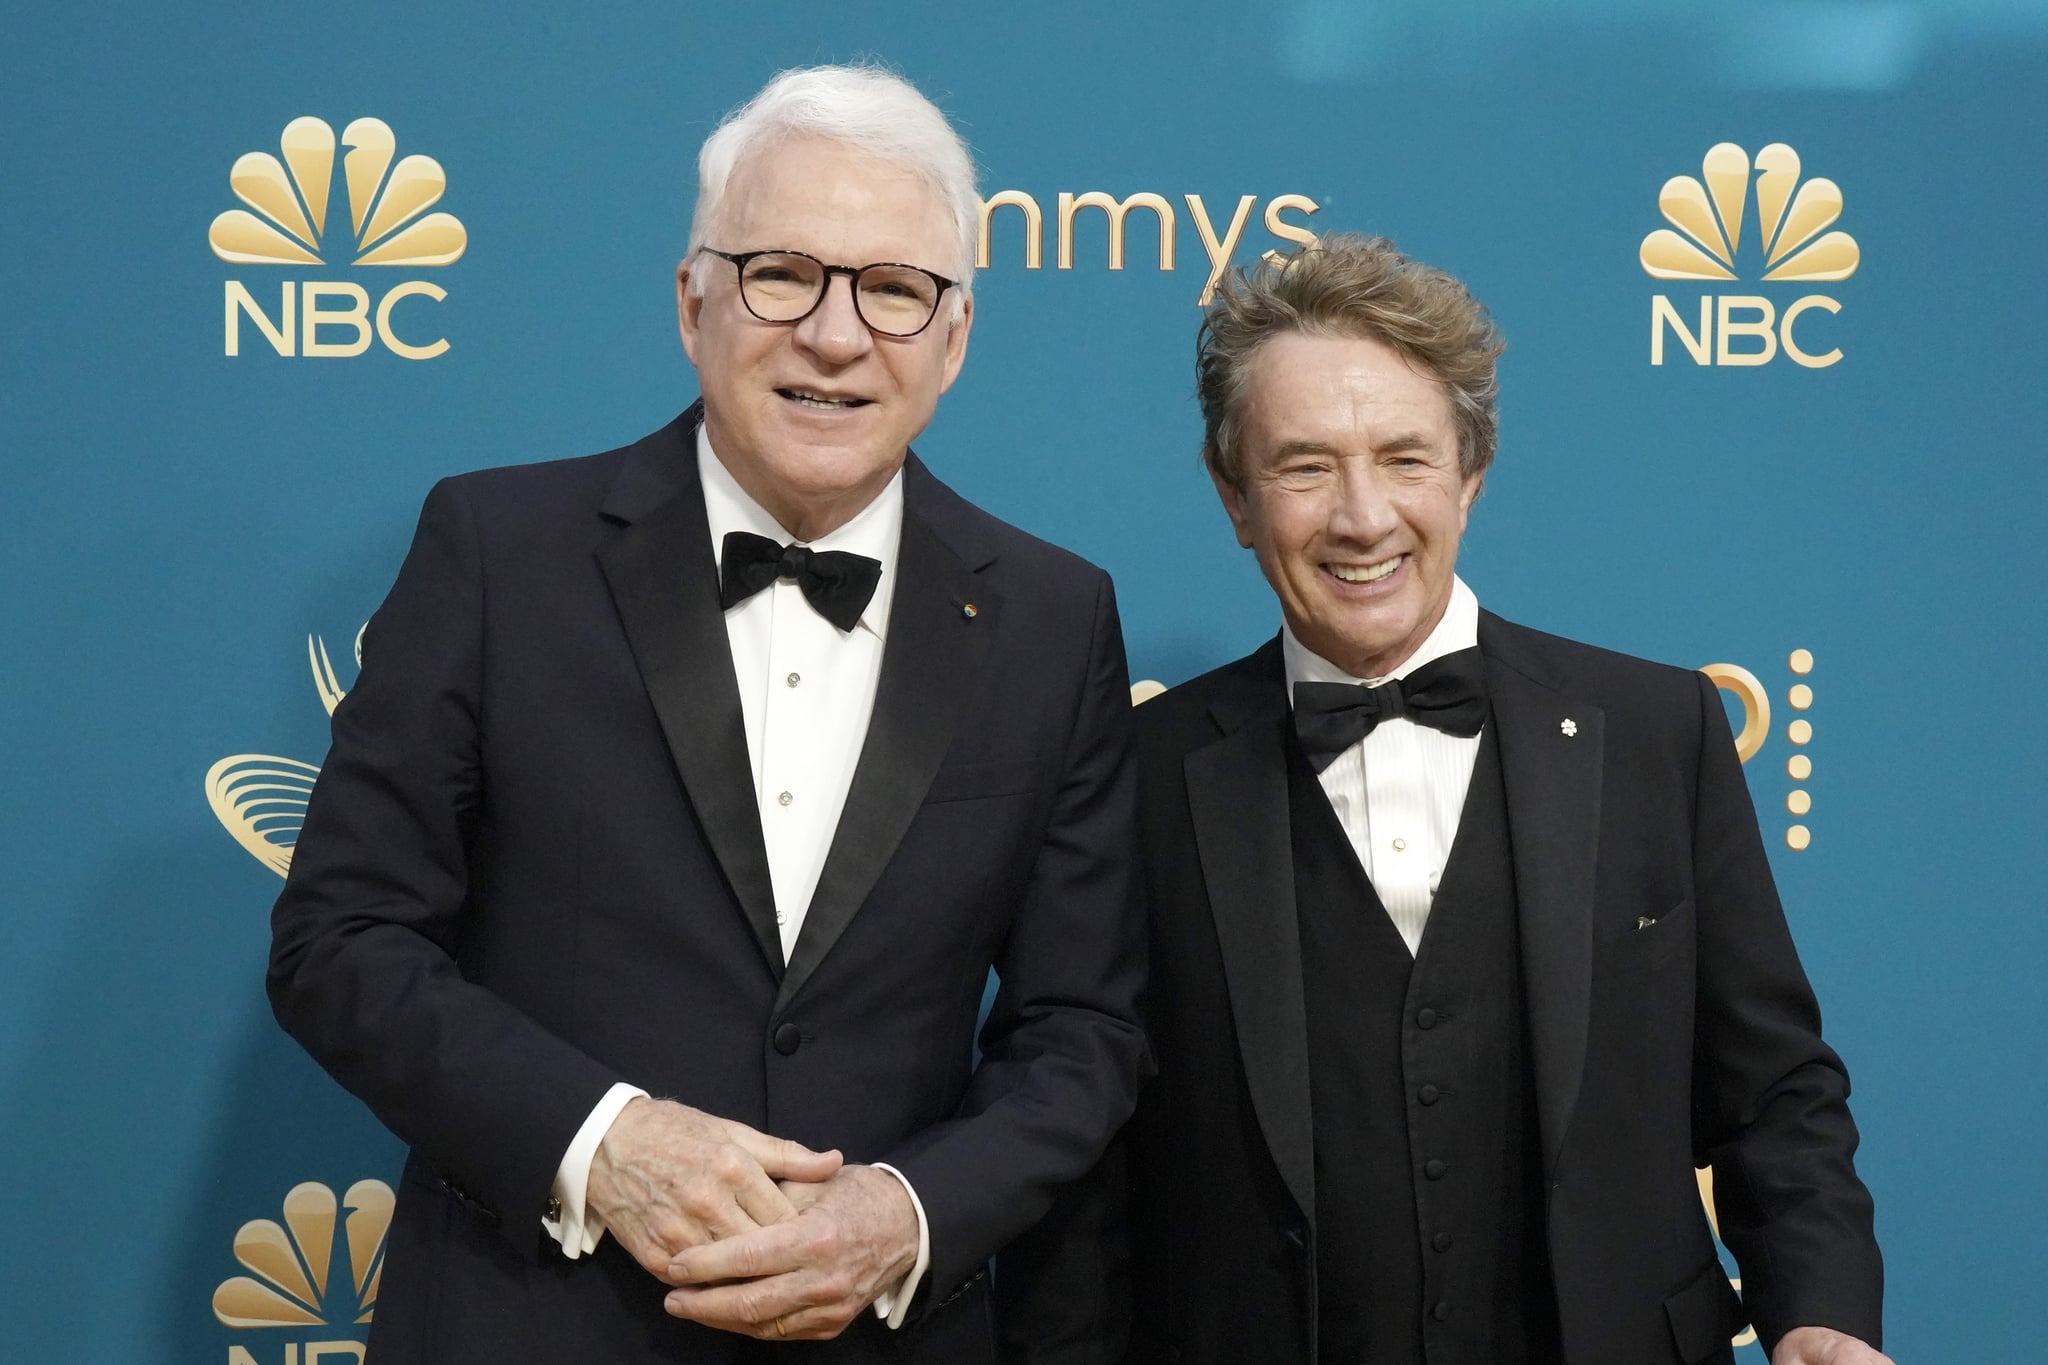 LOS ANGELES, CALIFORNIA - SEPTEMBER 12: 74th ANNUAL PRIMETIME EMMY AWARDS -- Pictured: (l-r) Steve Martin and Martin Short arrive to the 74th Annual Primetime Emmy Awards held at the Microsoft Theater on September 12, 2022. -- (Photo by Evans Vestal Ward/NBC via Getty Images)